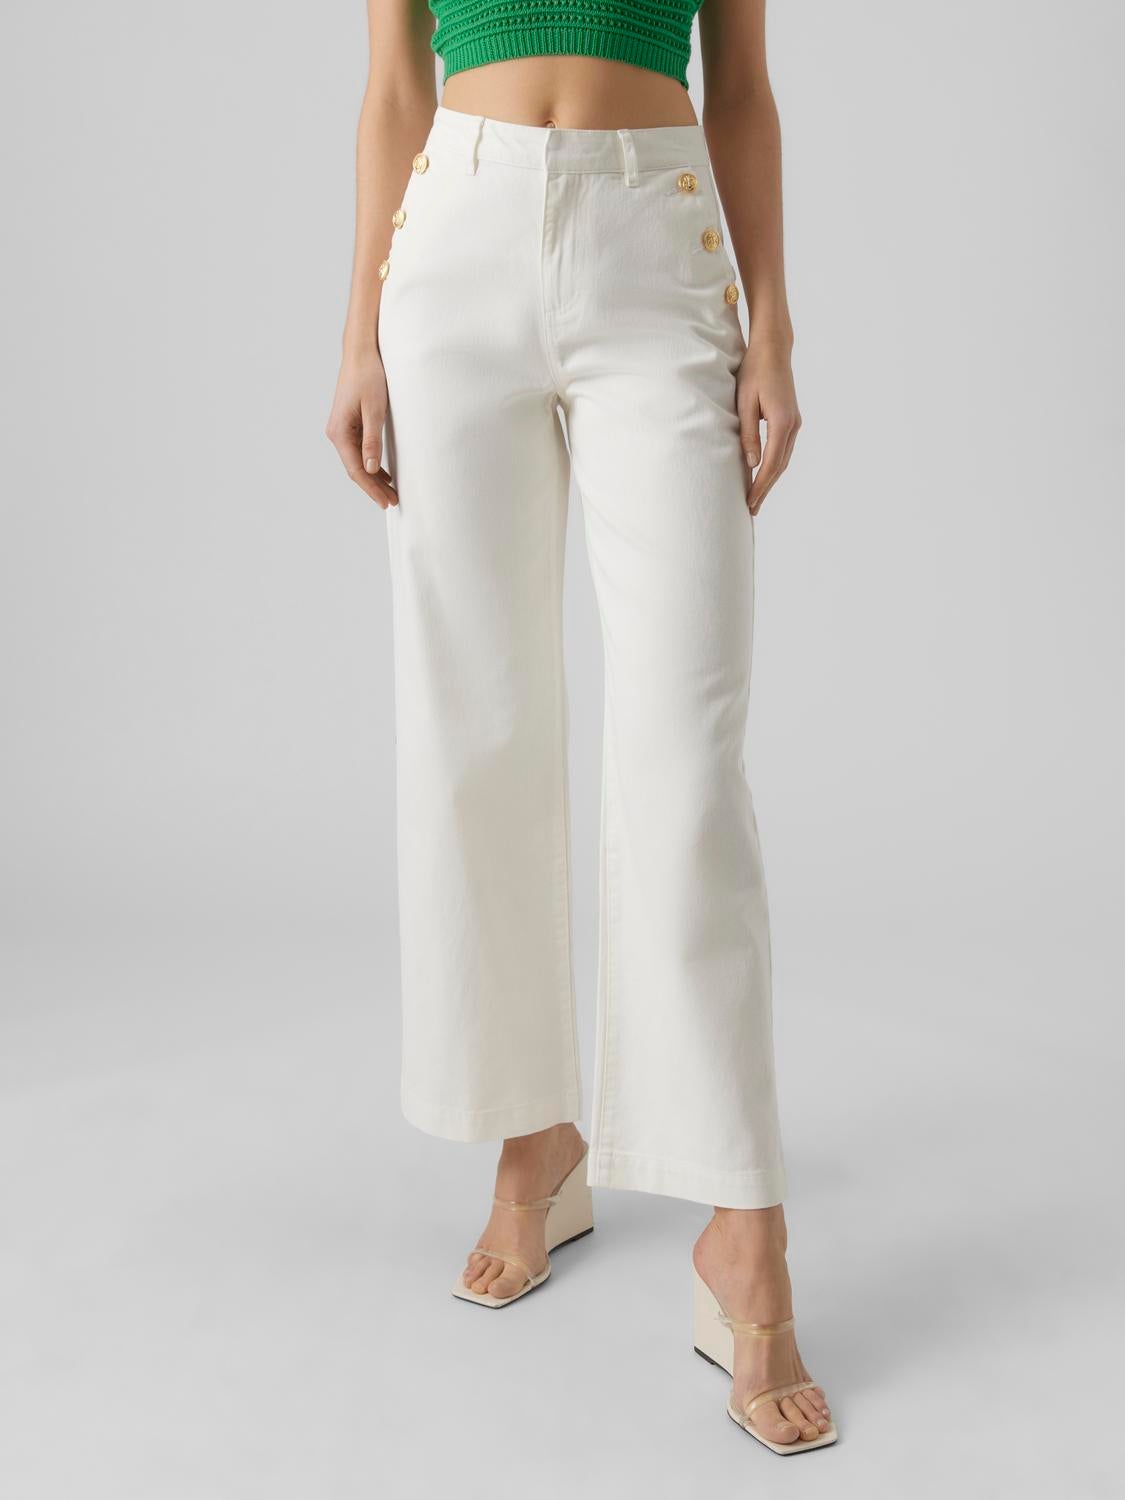 Vero Moda linen touch soft tailored wide leg trousers in white | ASOS